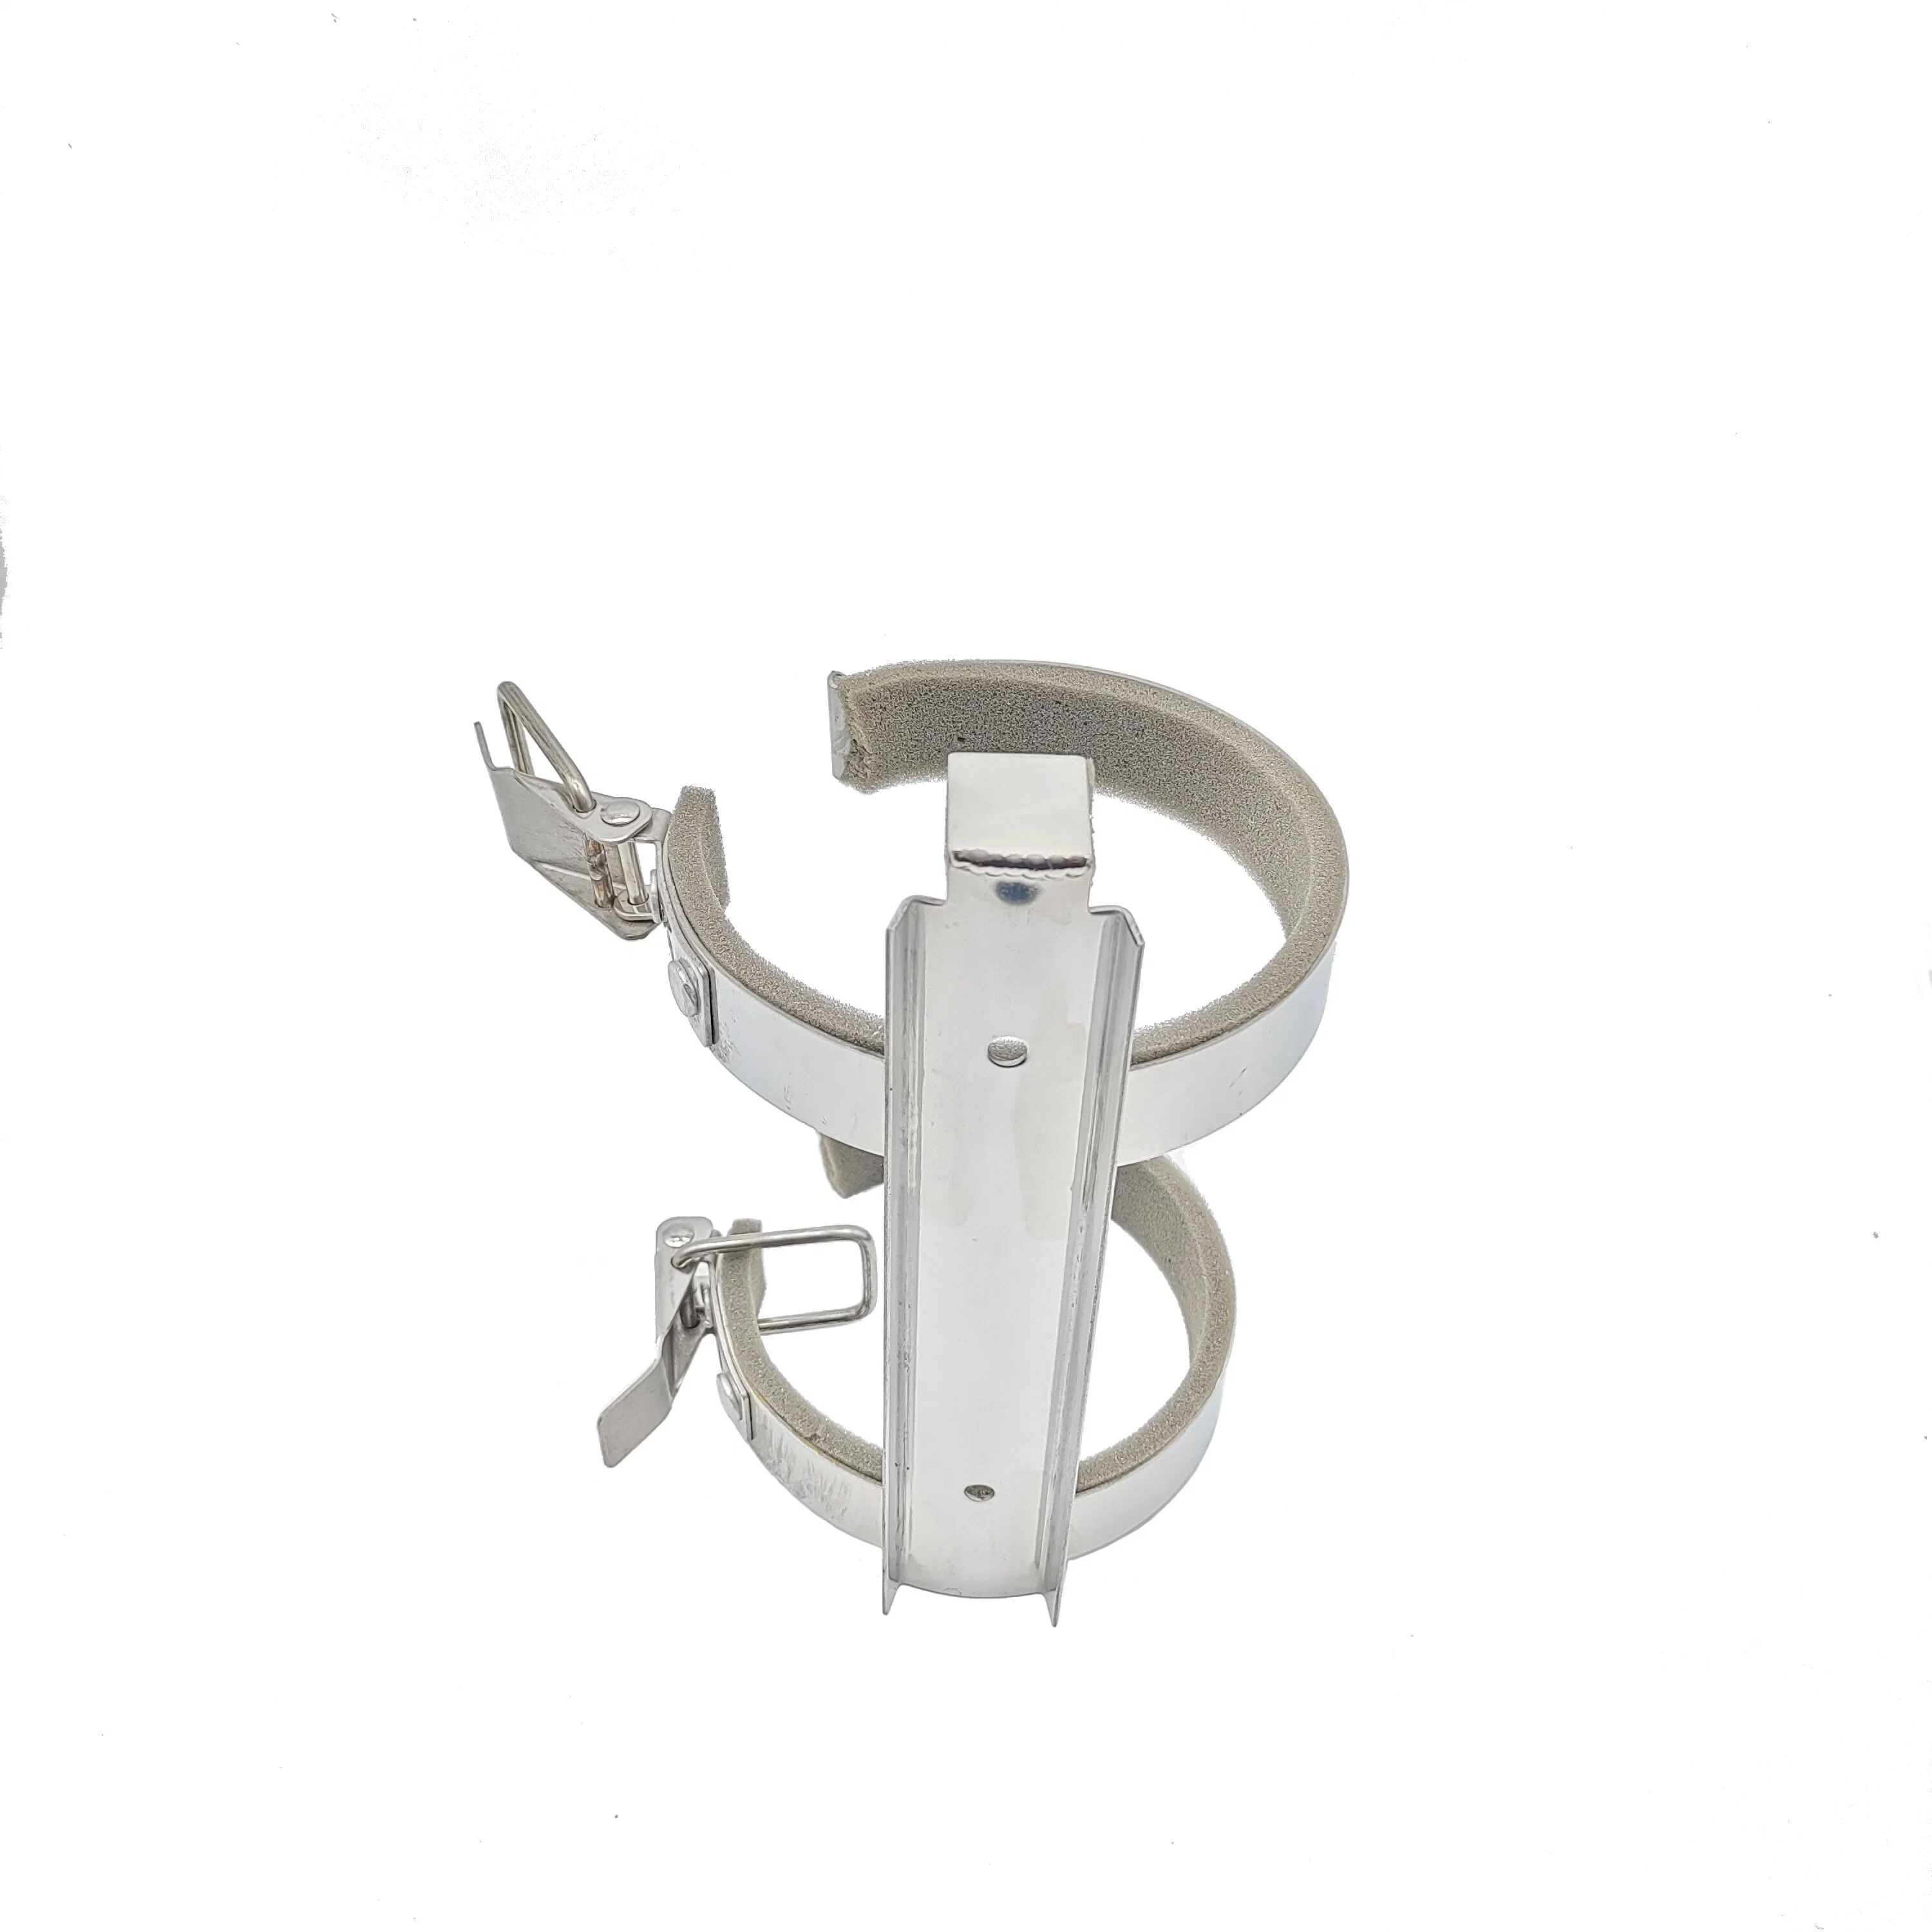 Professional Stainless Steel Fire Extinguisher Bracket - Corrosion-Resistant Fire Safety Wall Mount